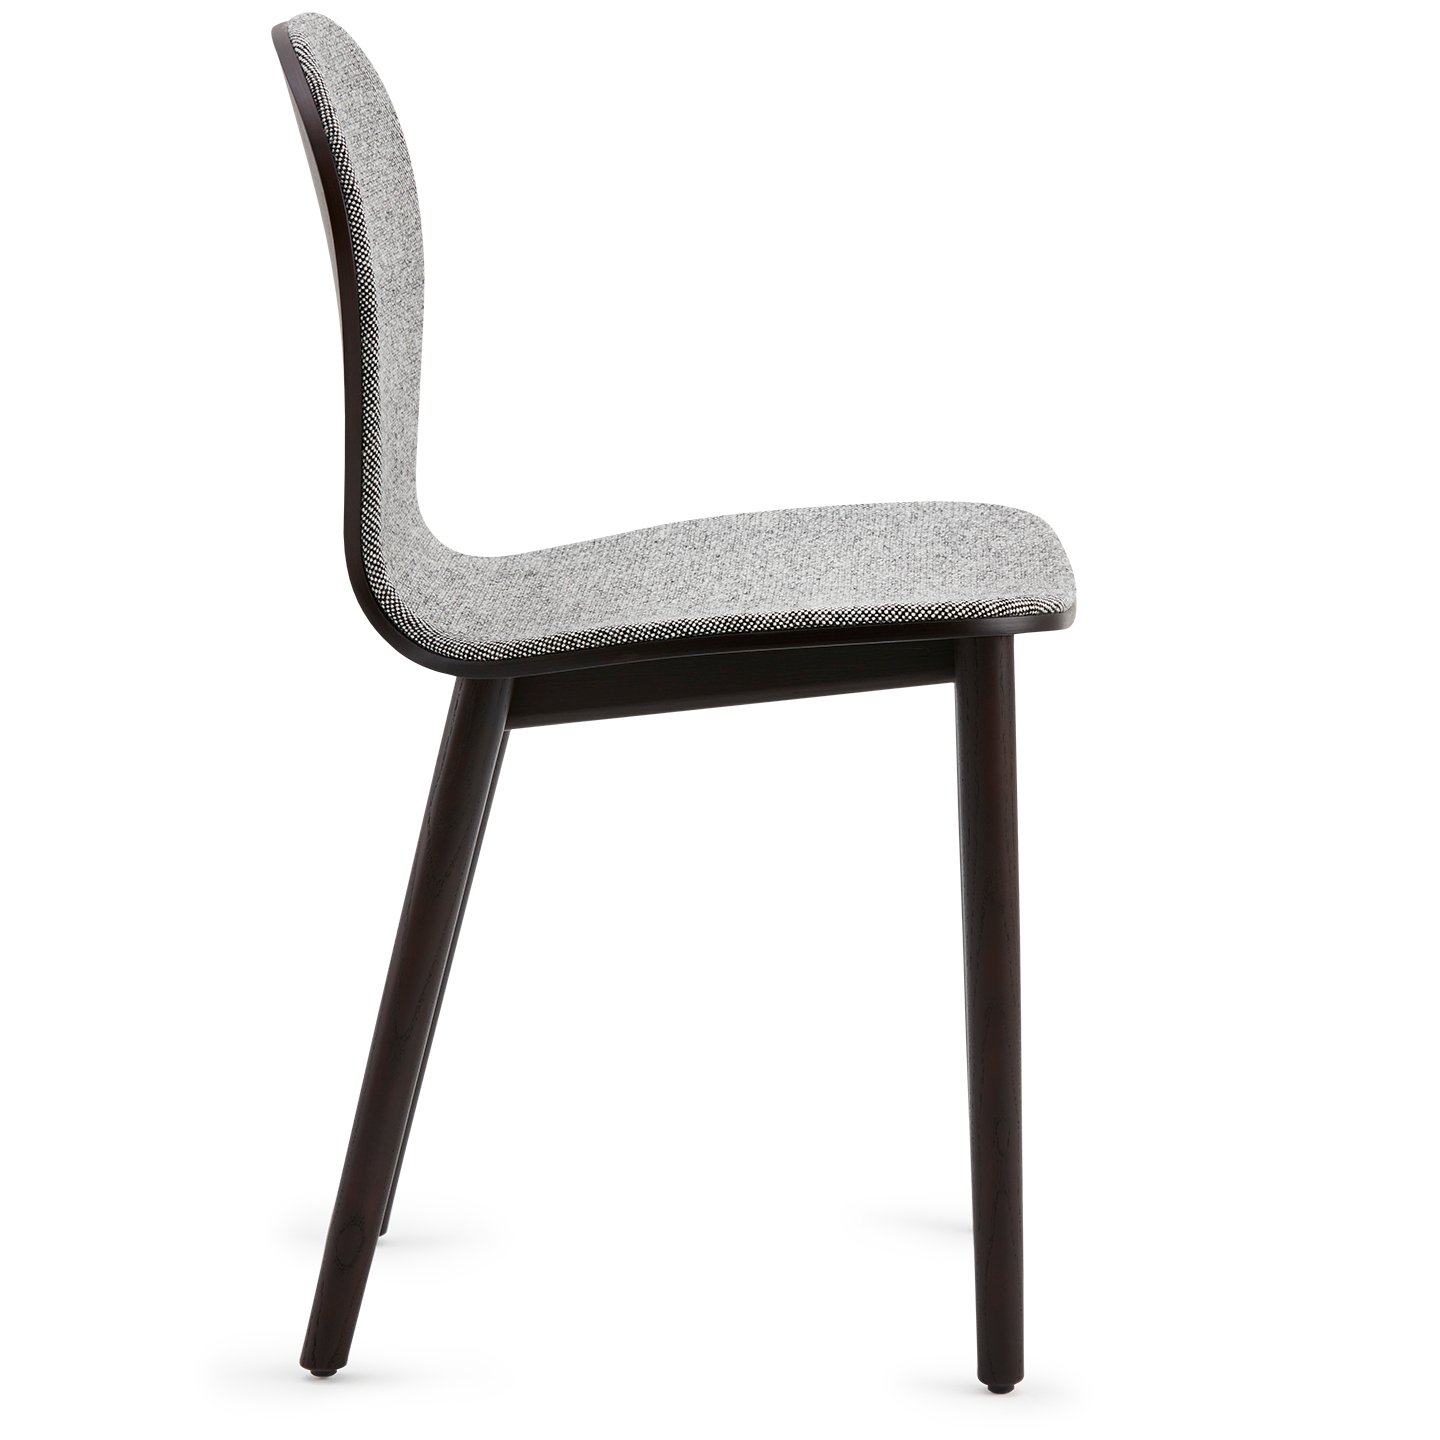 Haworth Bac Two side chair in grey and dark brown side view